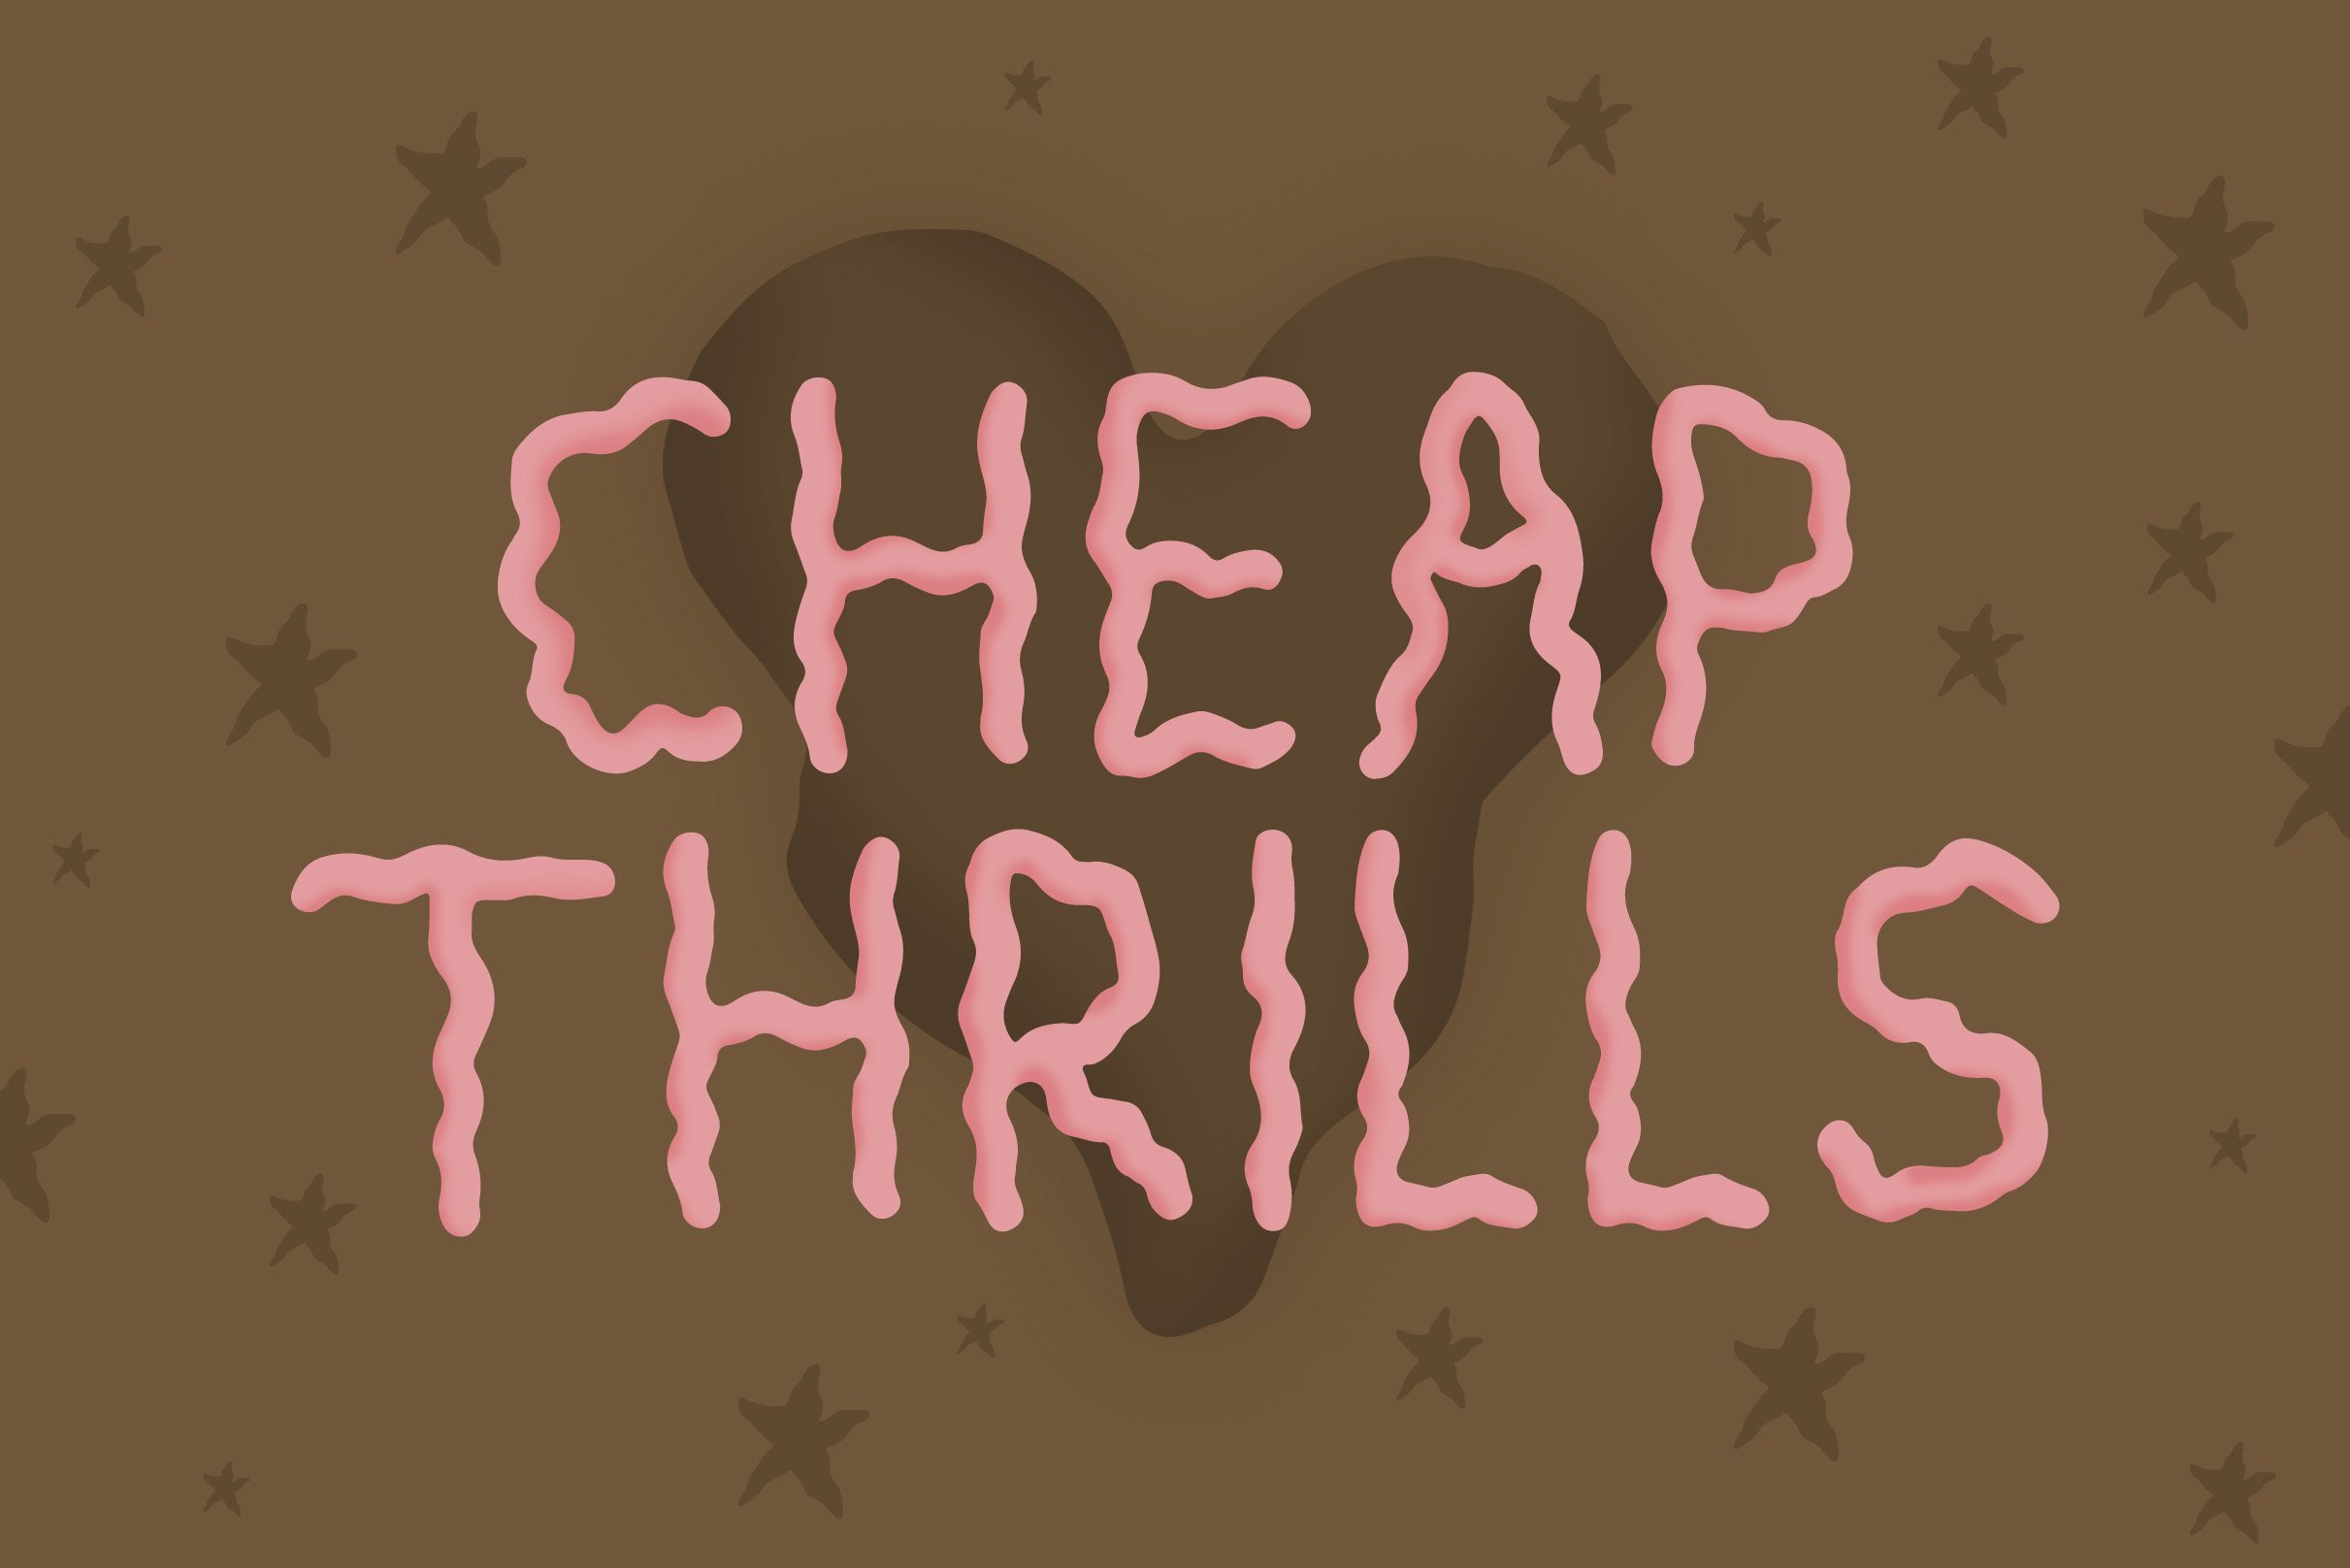 Cheap Thrills Font cover image.